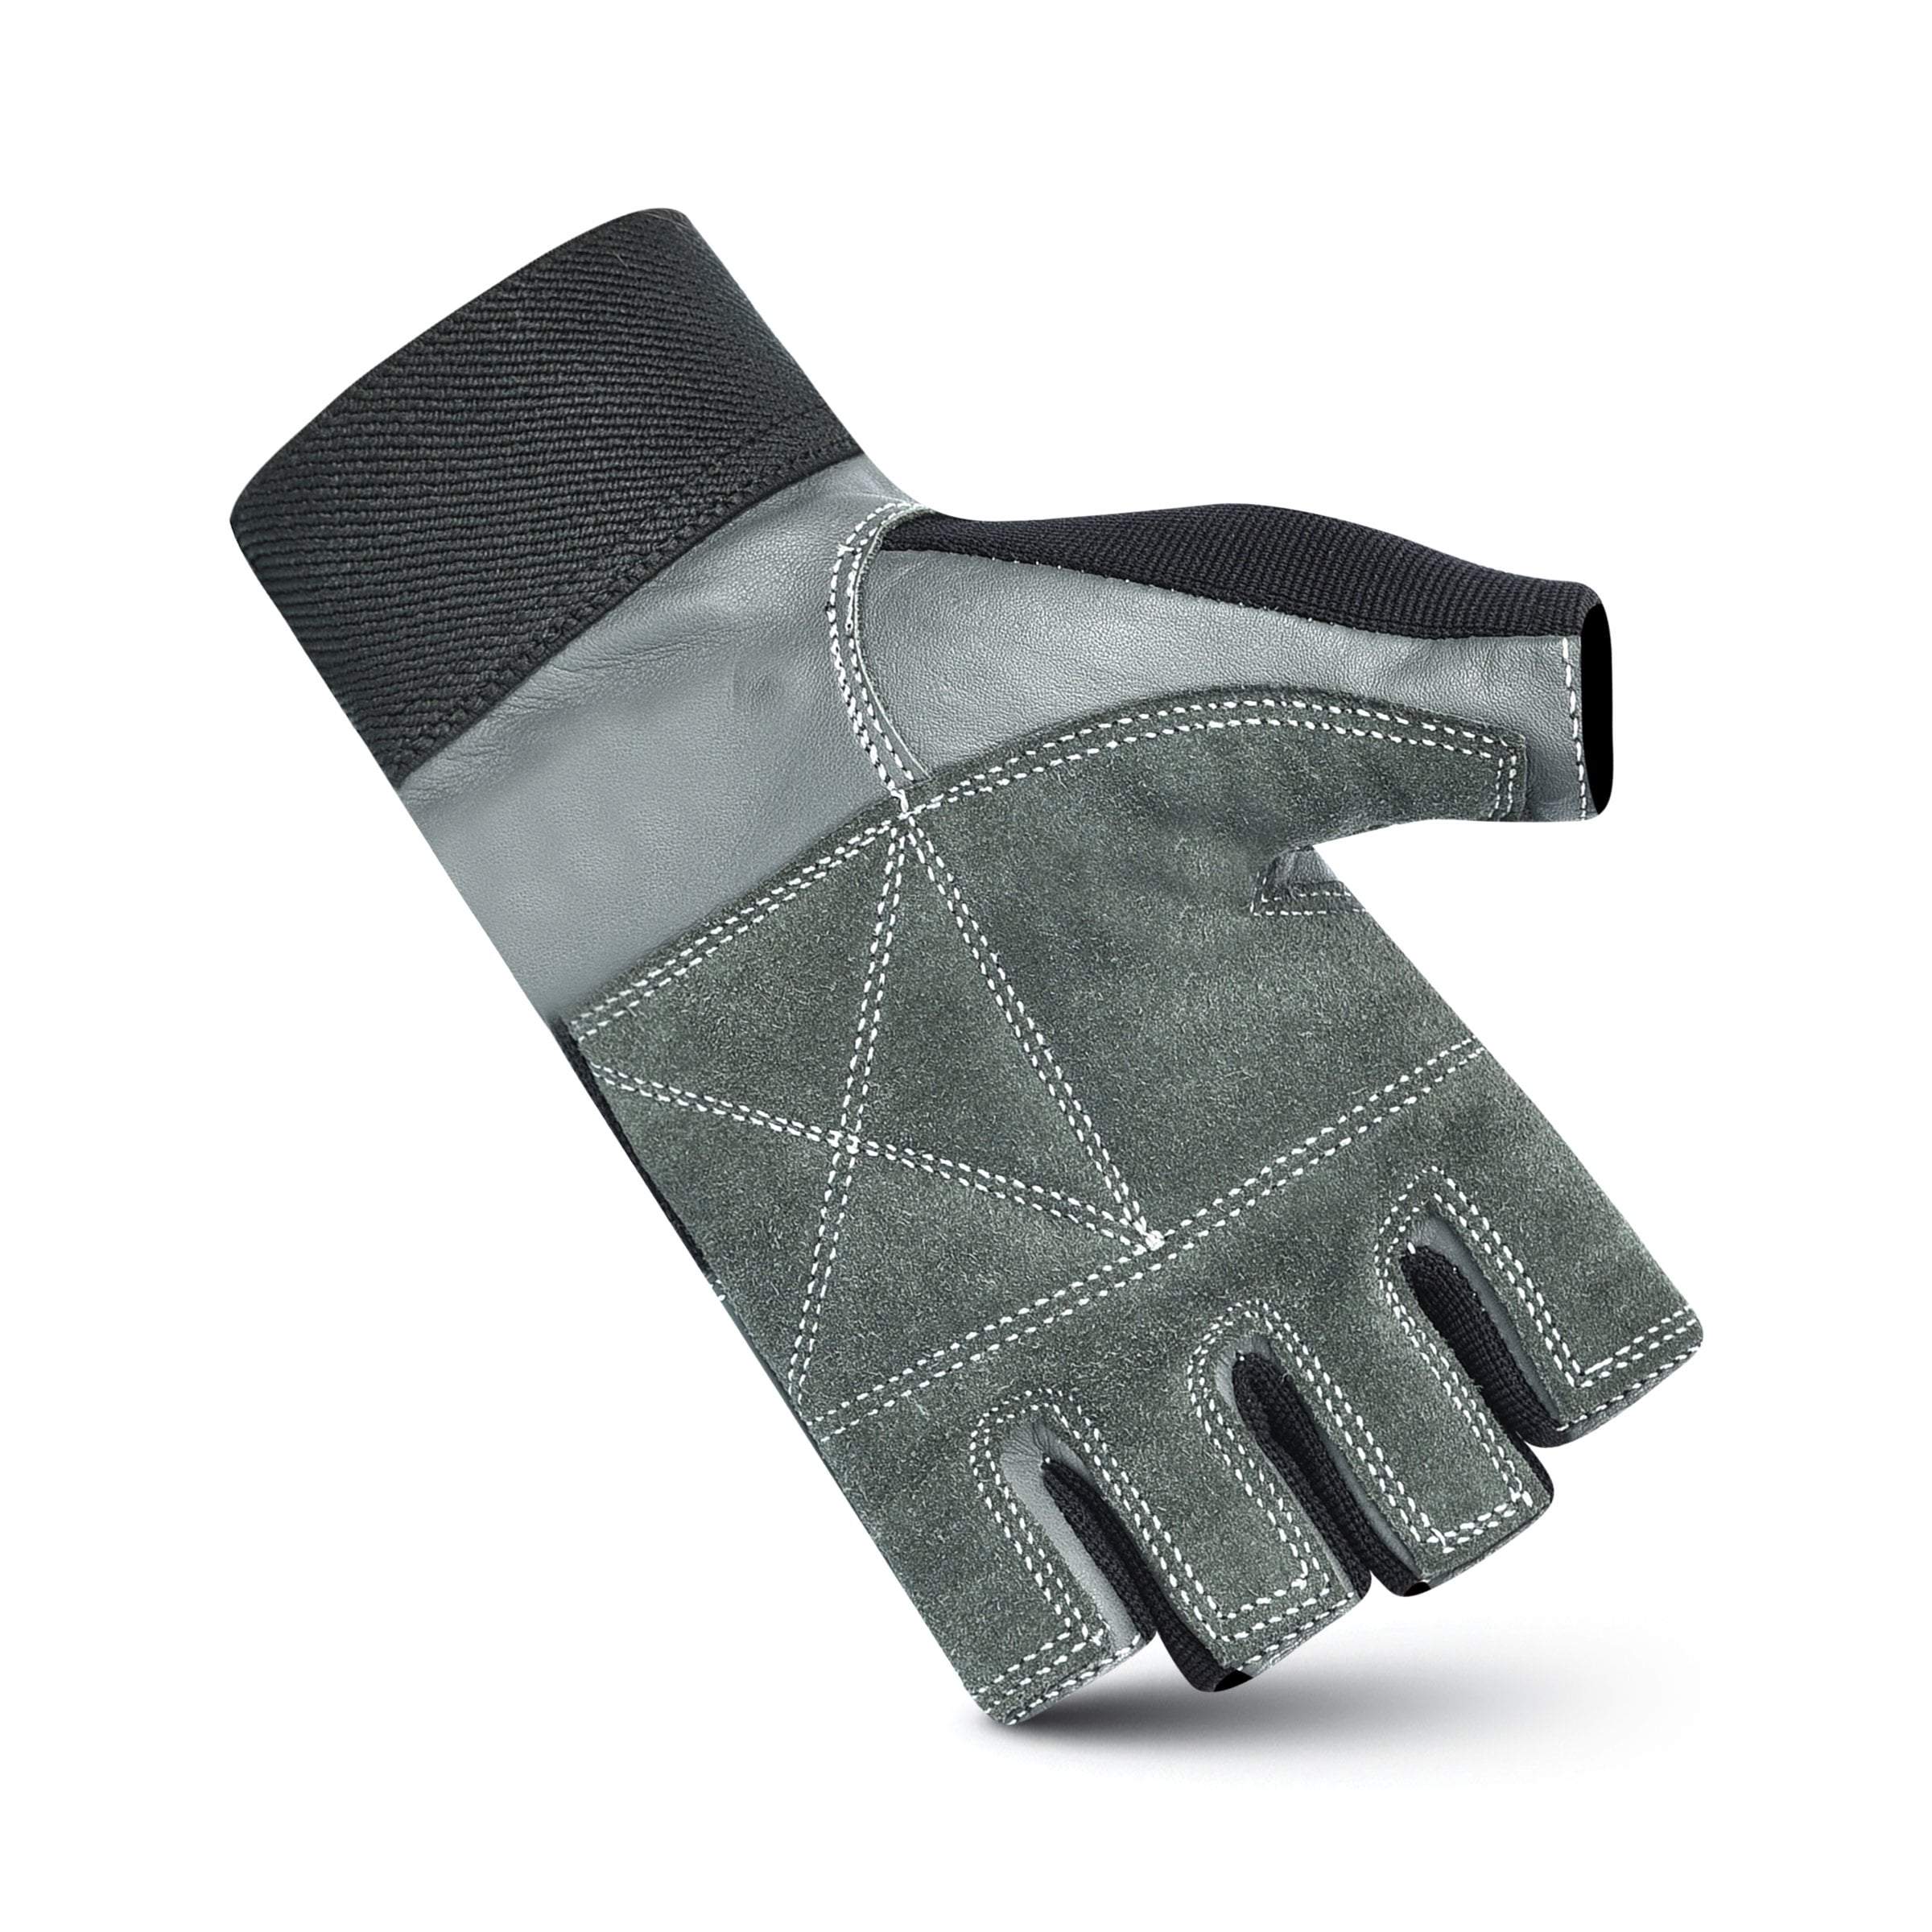 FITNESS FOX Weightlifting Gym workout Gloves